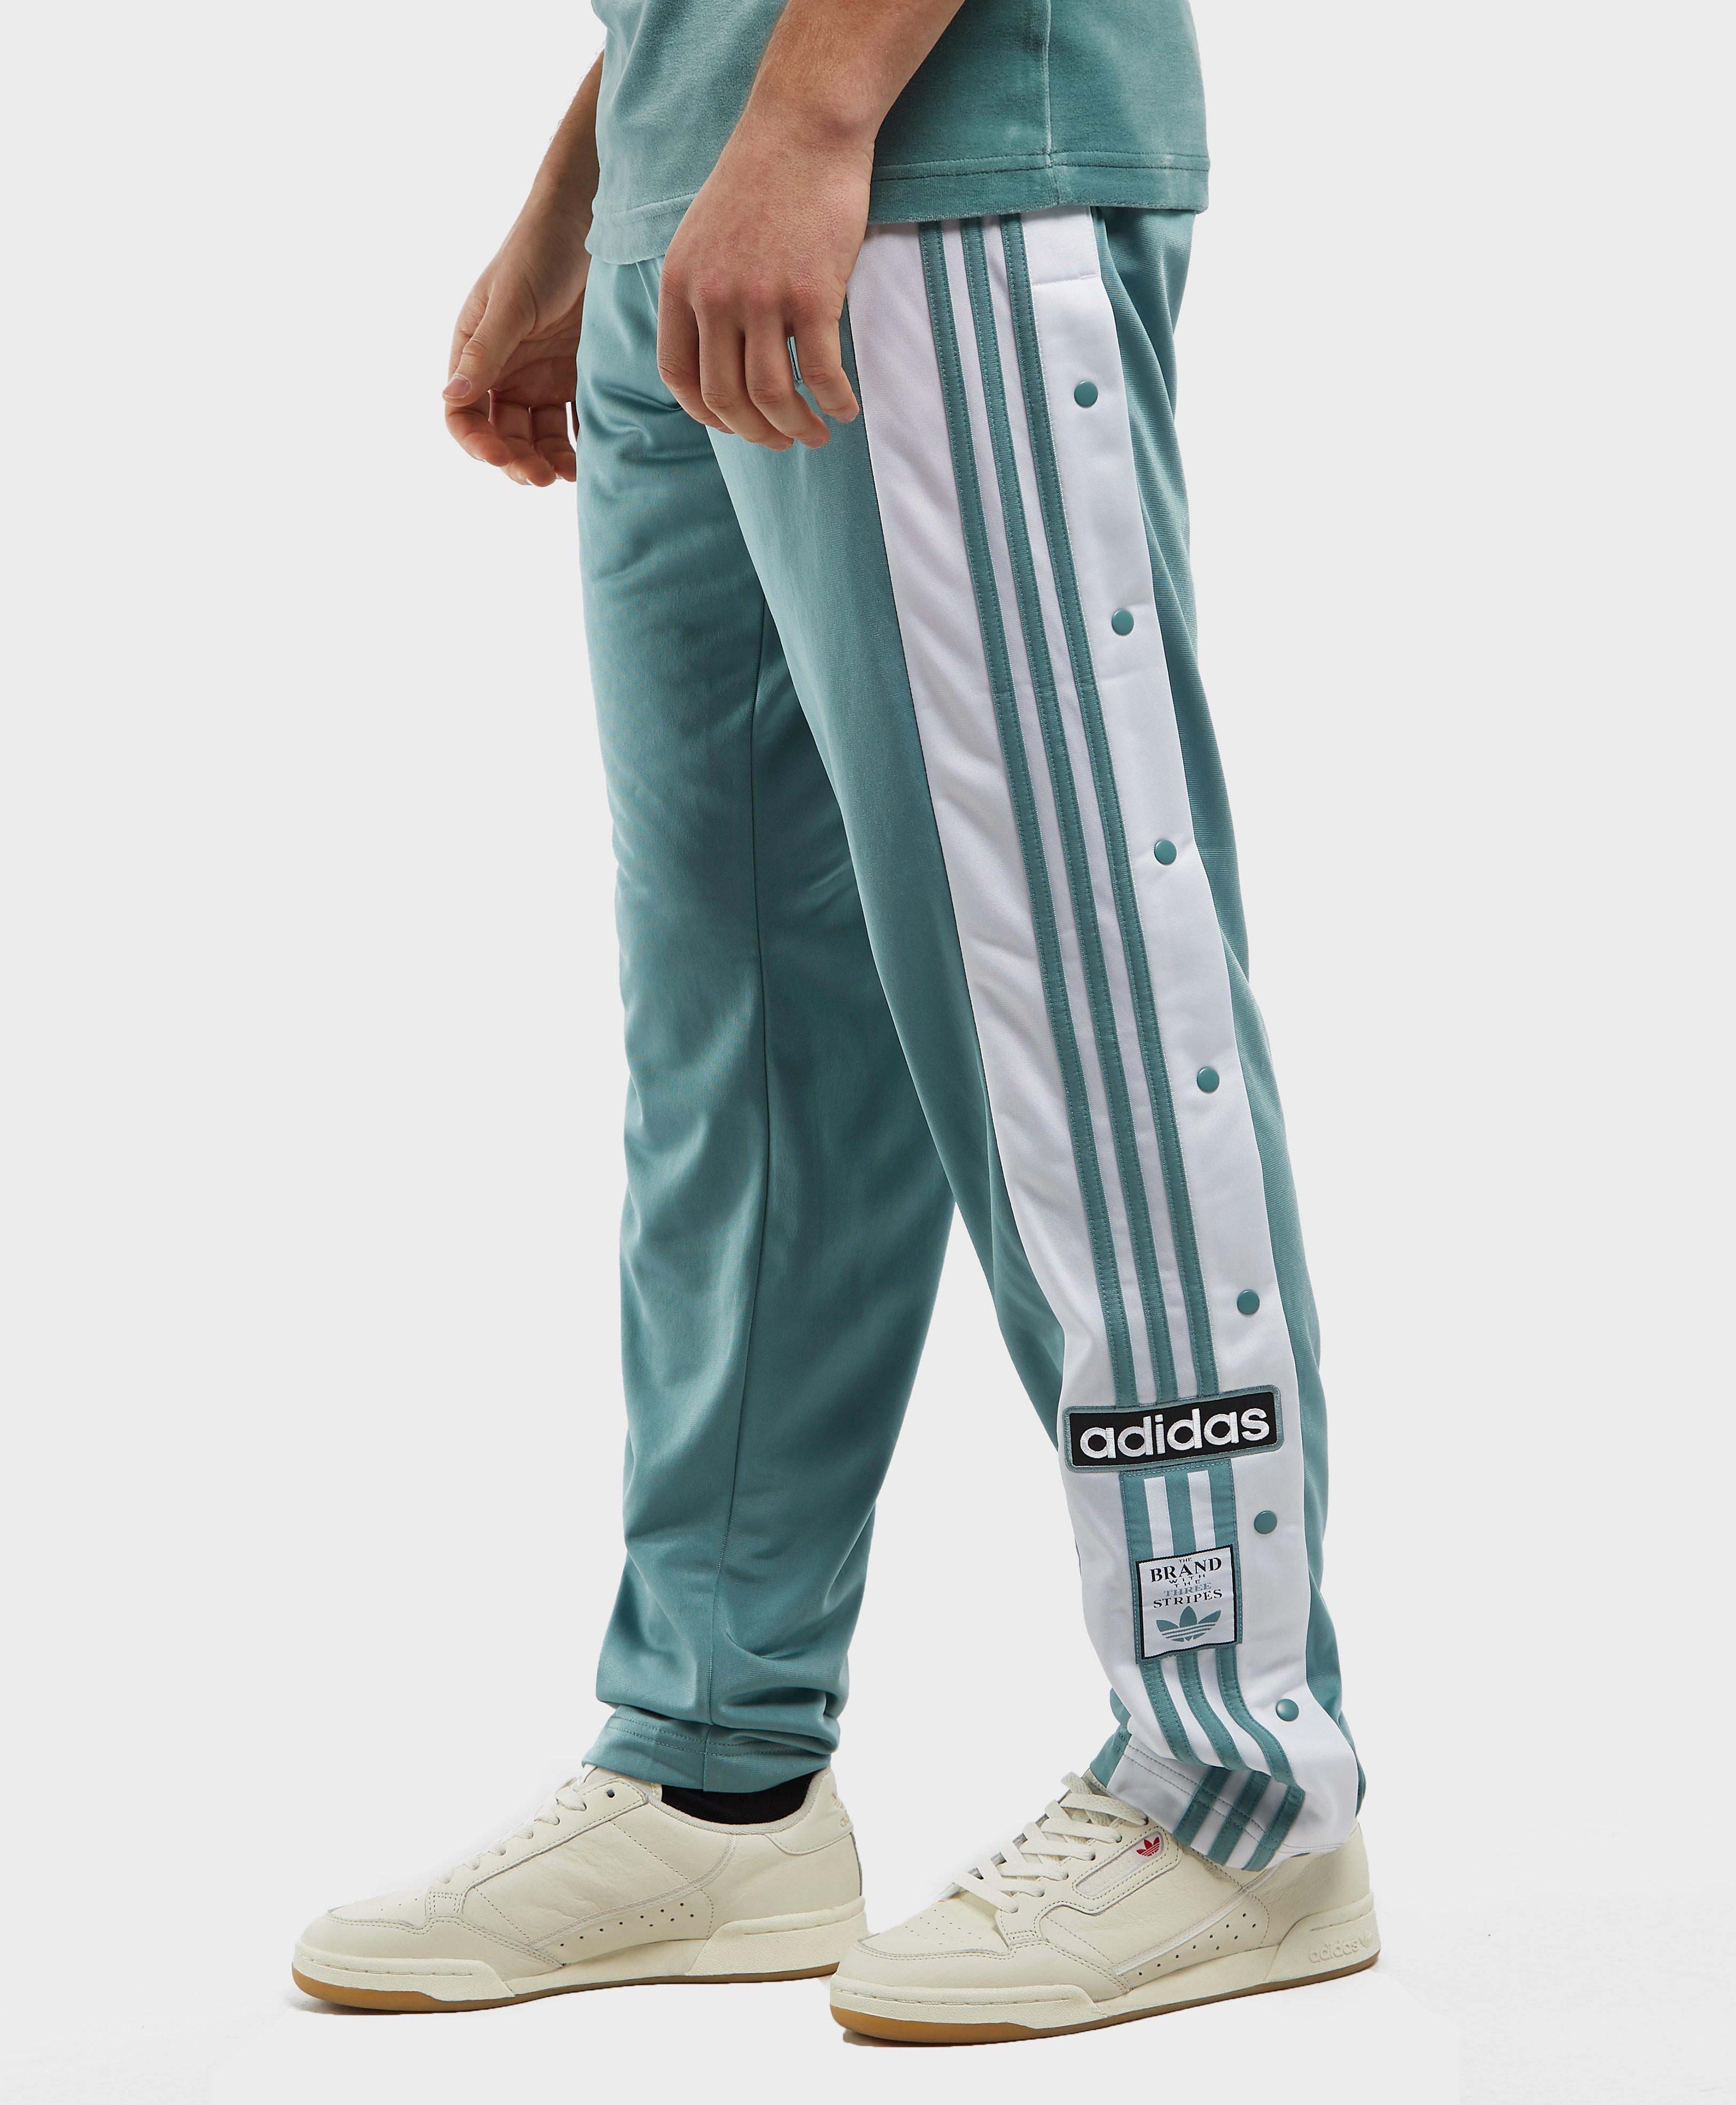 button track pants adidas